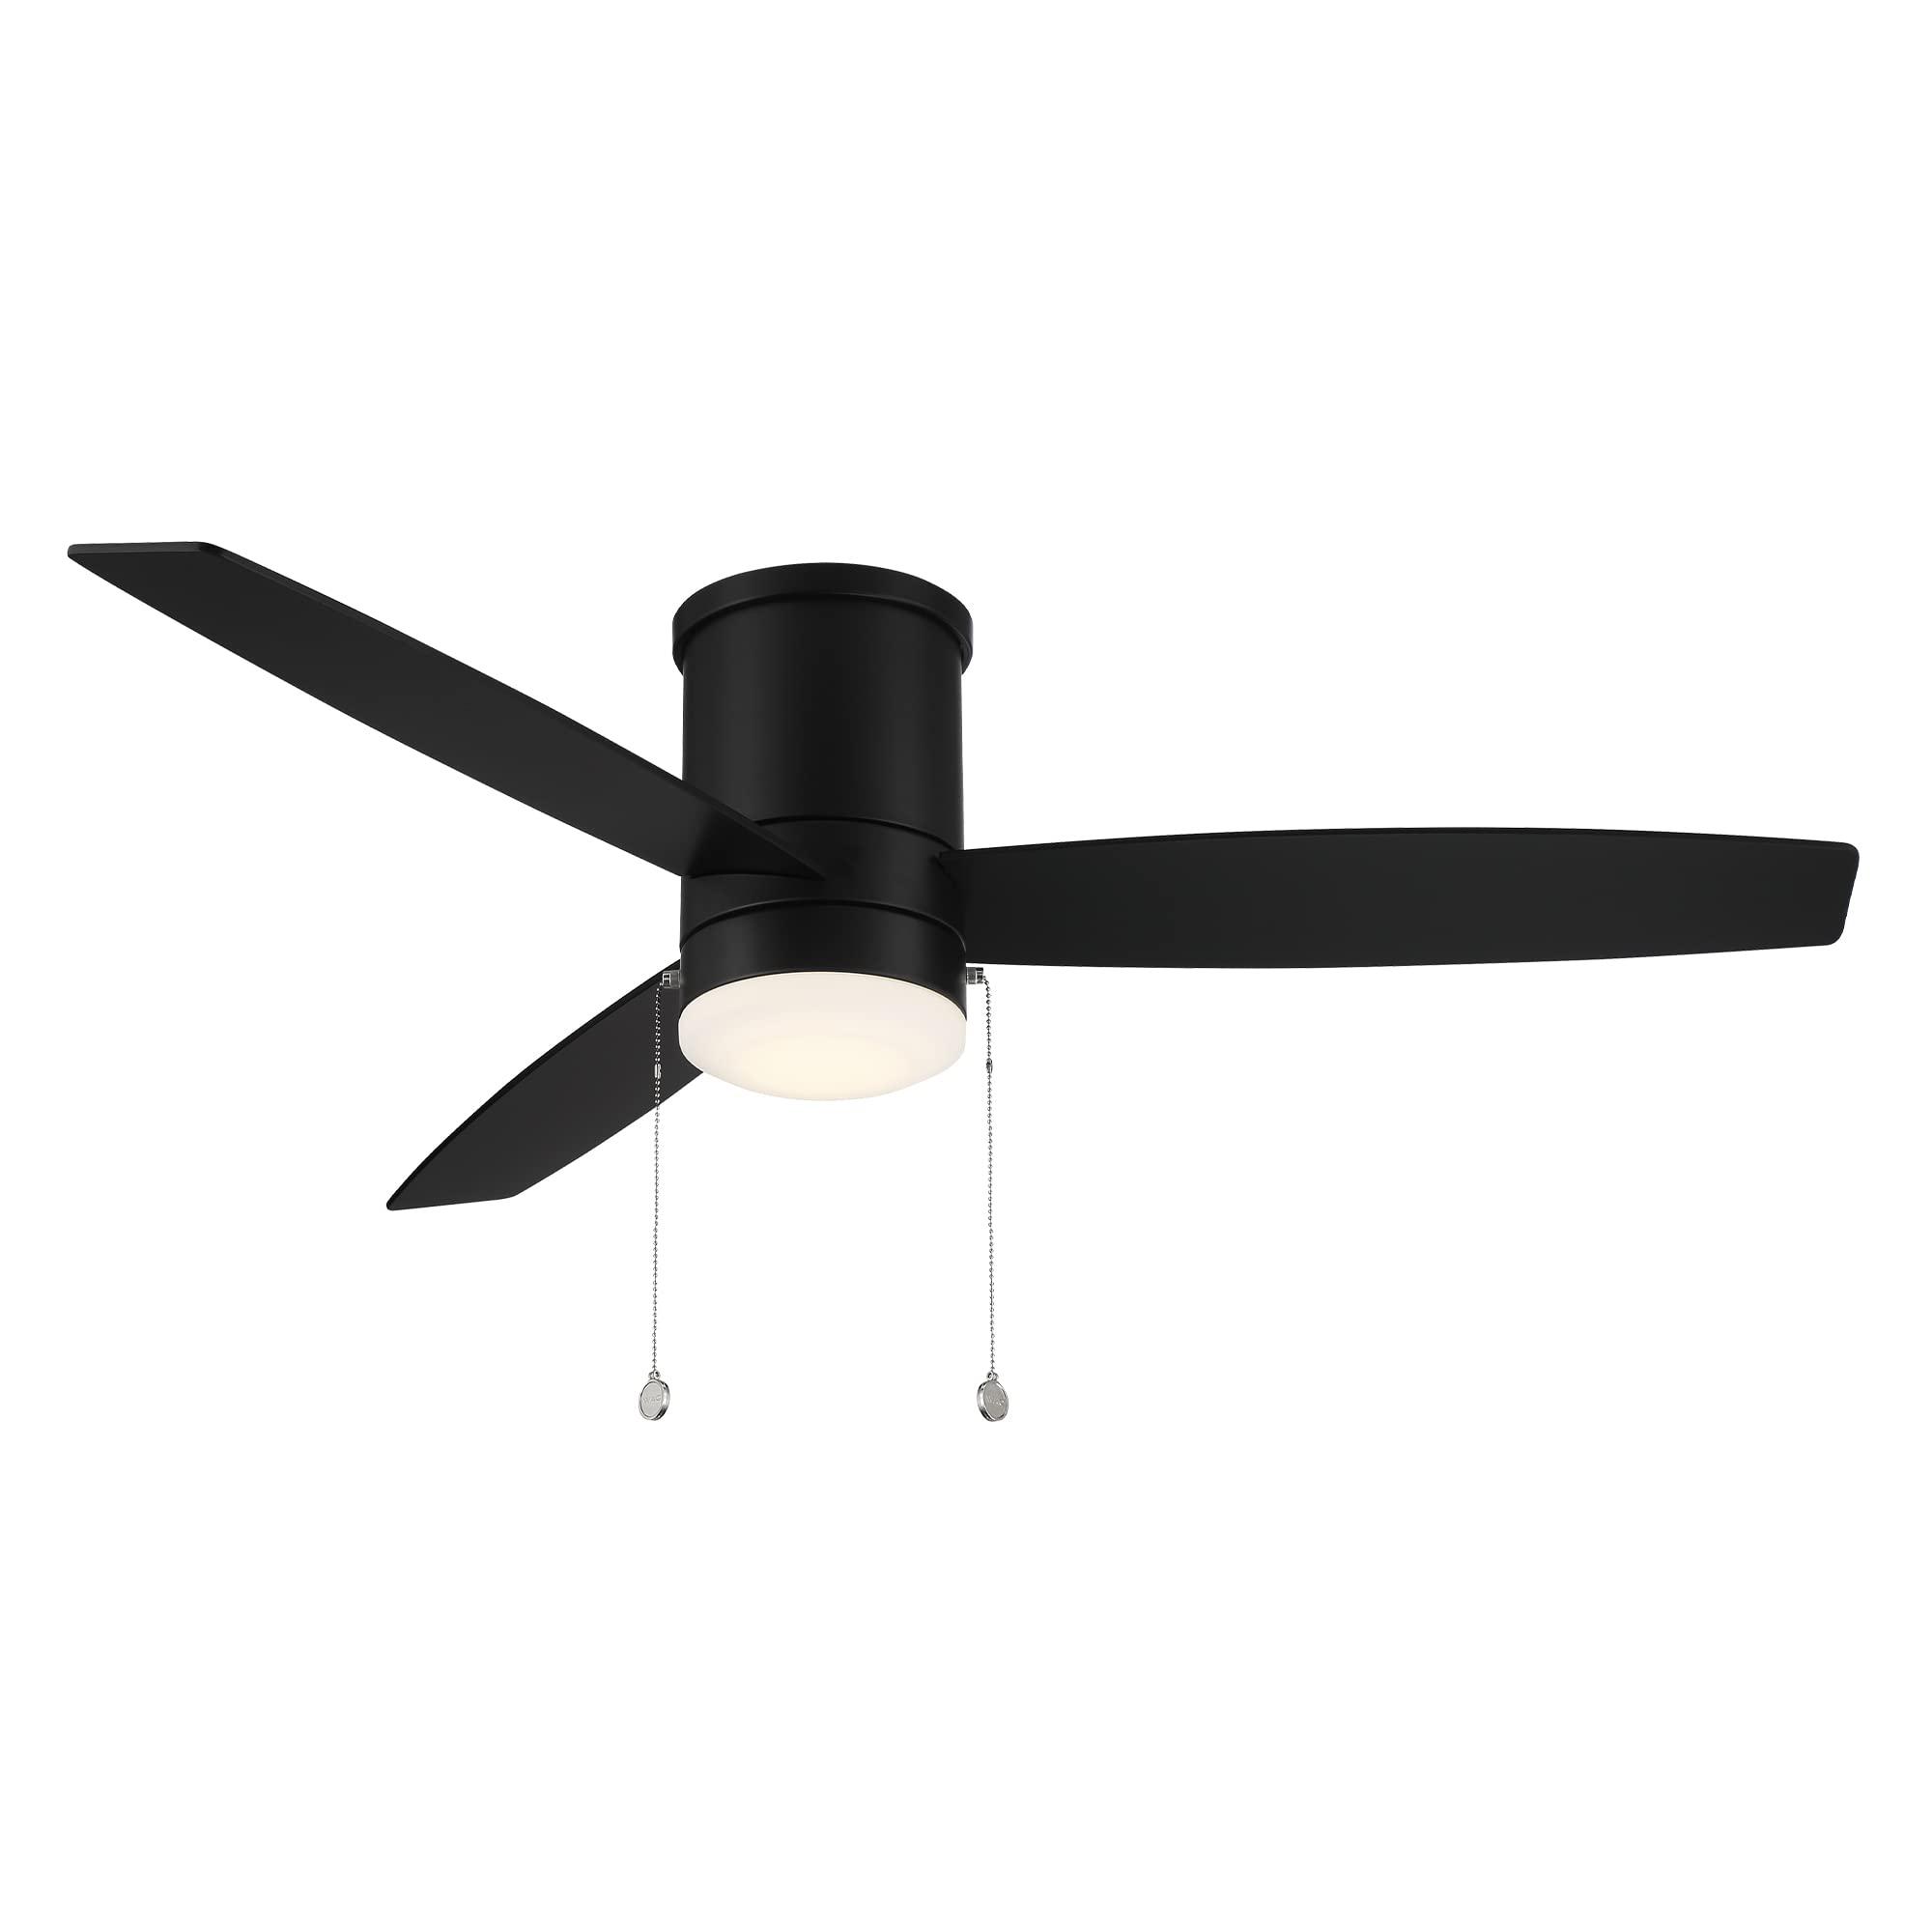 WAC Lighting wac atlantis indoor and outdoor 3-blade pull chain flush mount ceiling fan 52in matte black with 3000k led light kit